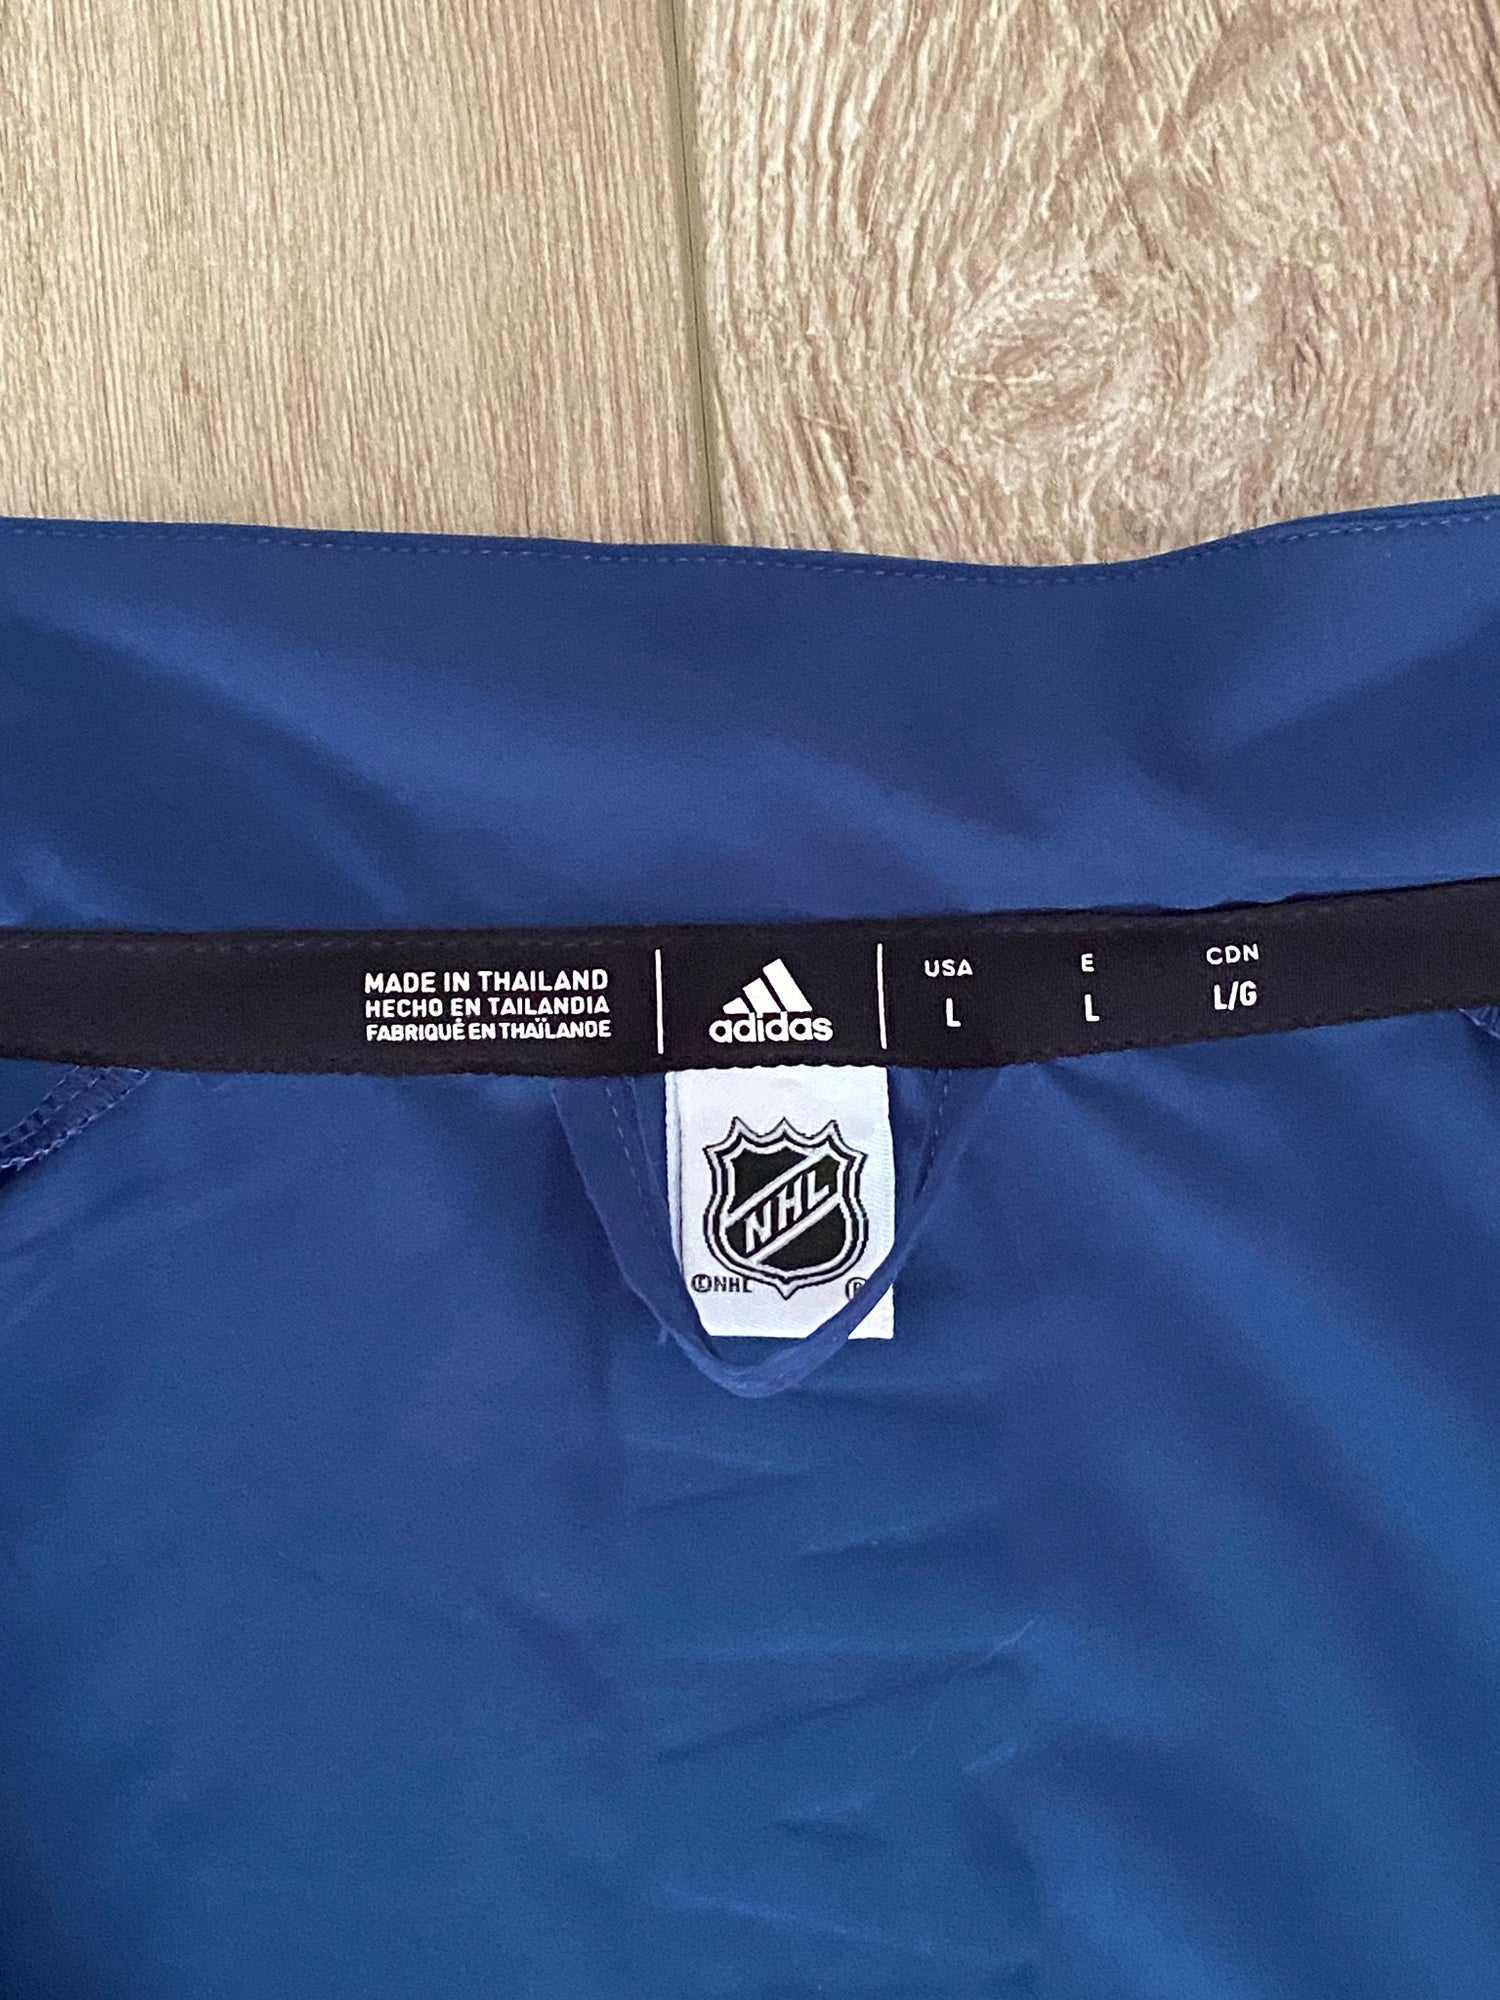 Toronto Maple Leafs full zip jacket Adidas Game Mode NHL NEW with